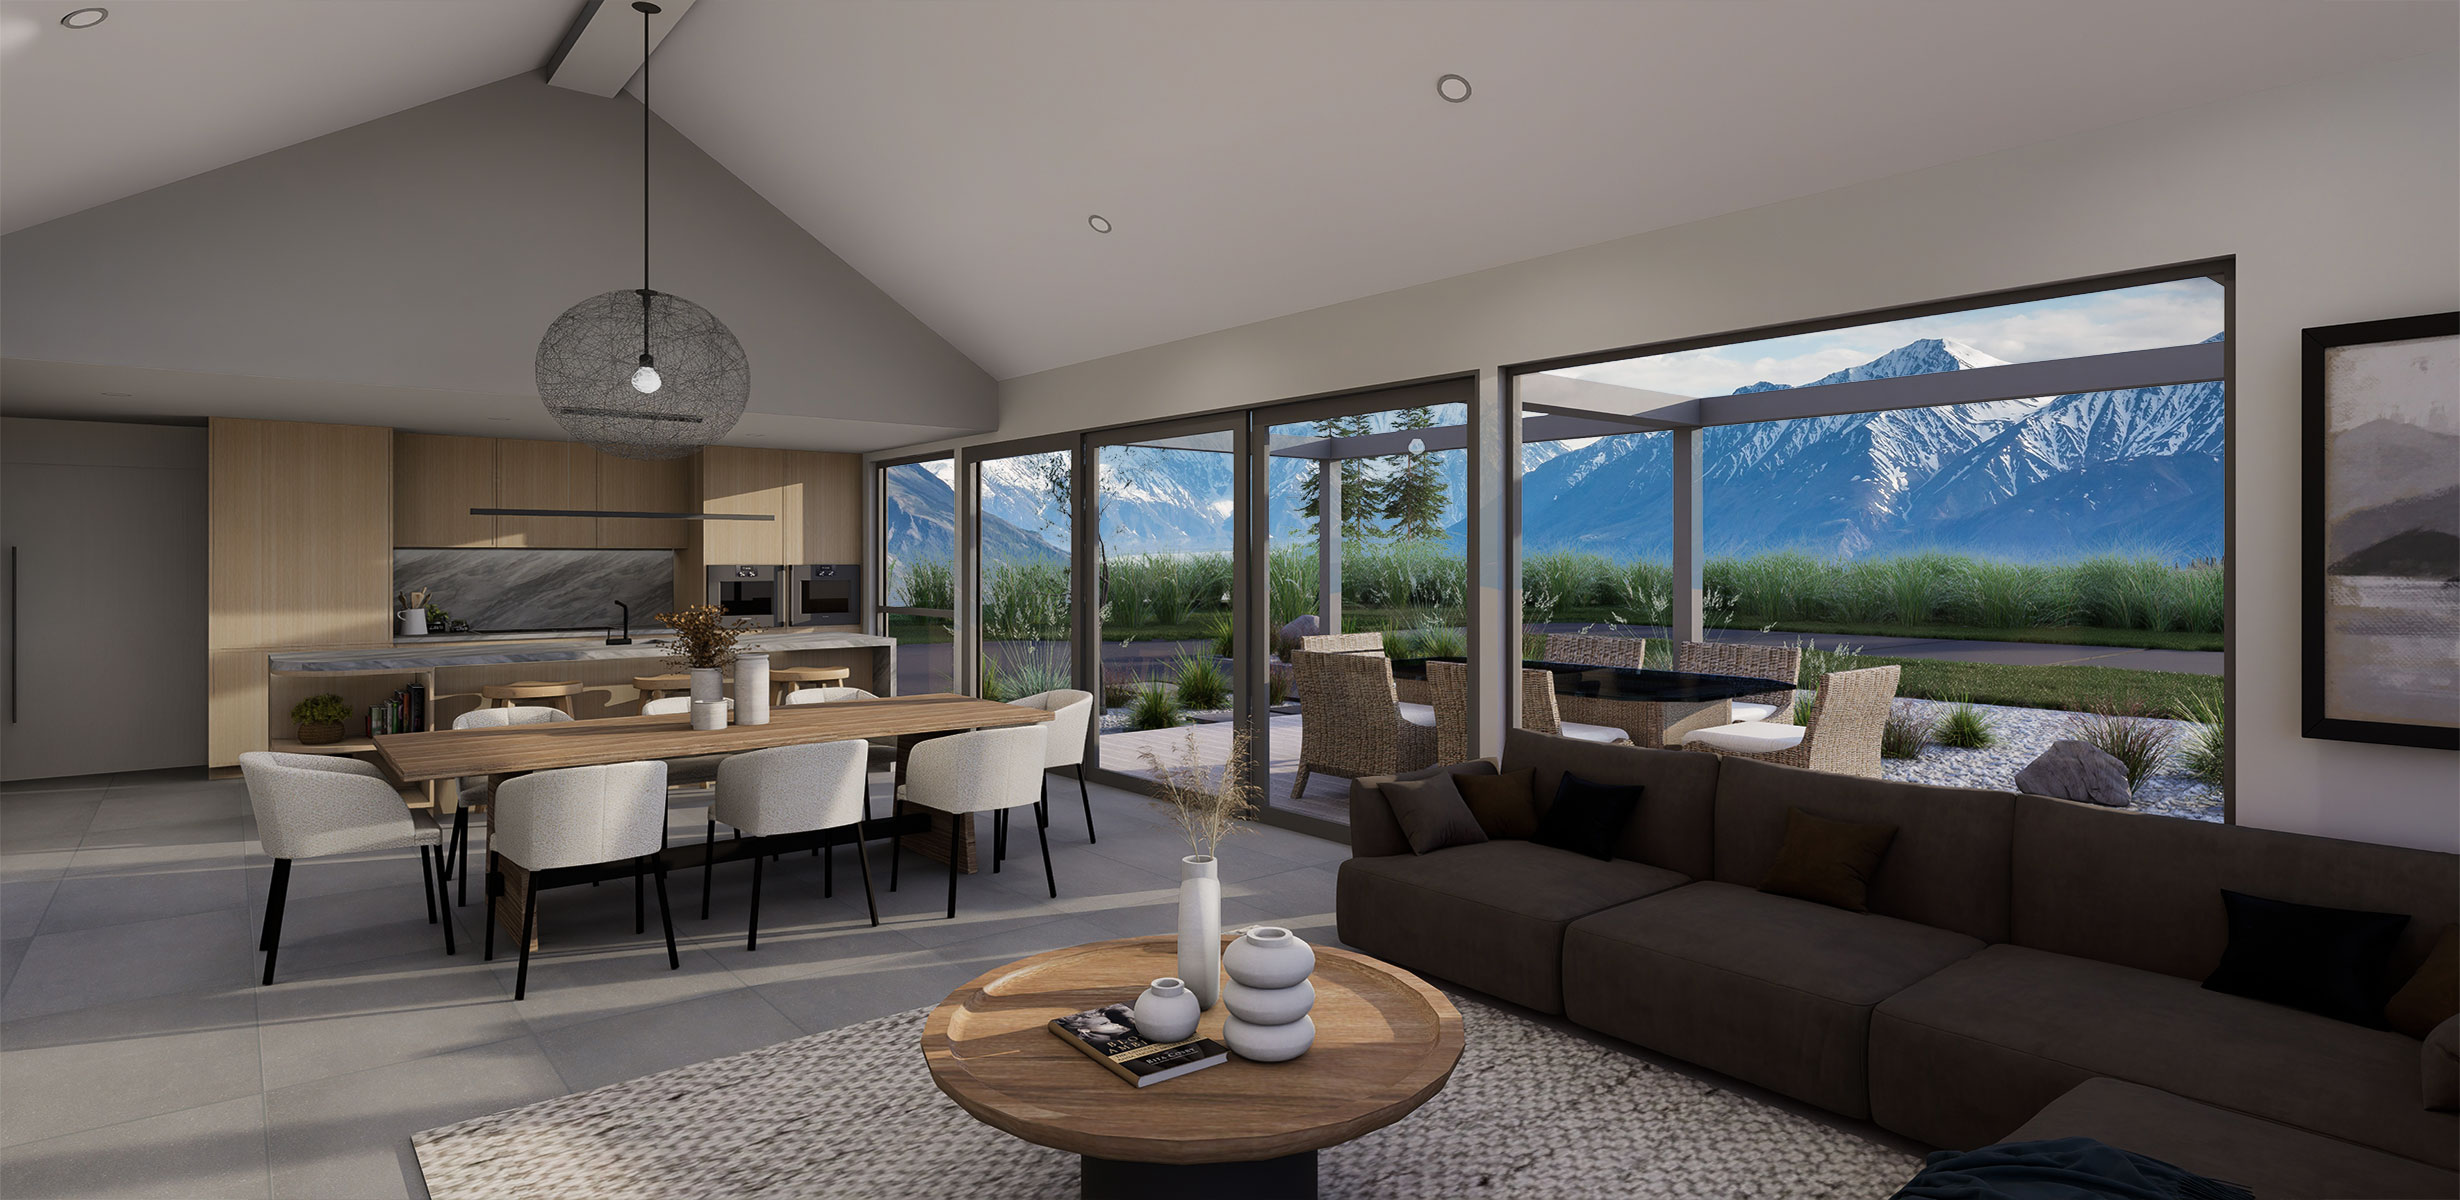 Rakaia House Plan Living Room View NZ - Our spacious open plan design that seamlessly connects living areas and offers stylish functionality. Enjoy ultimate convenience.